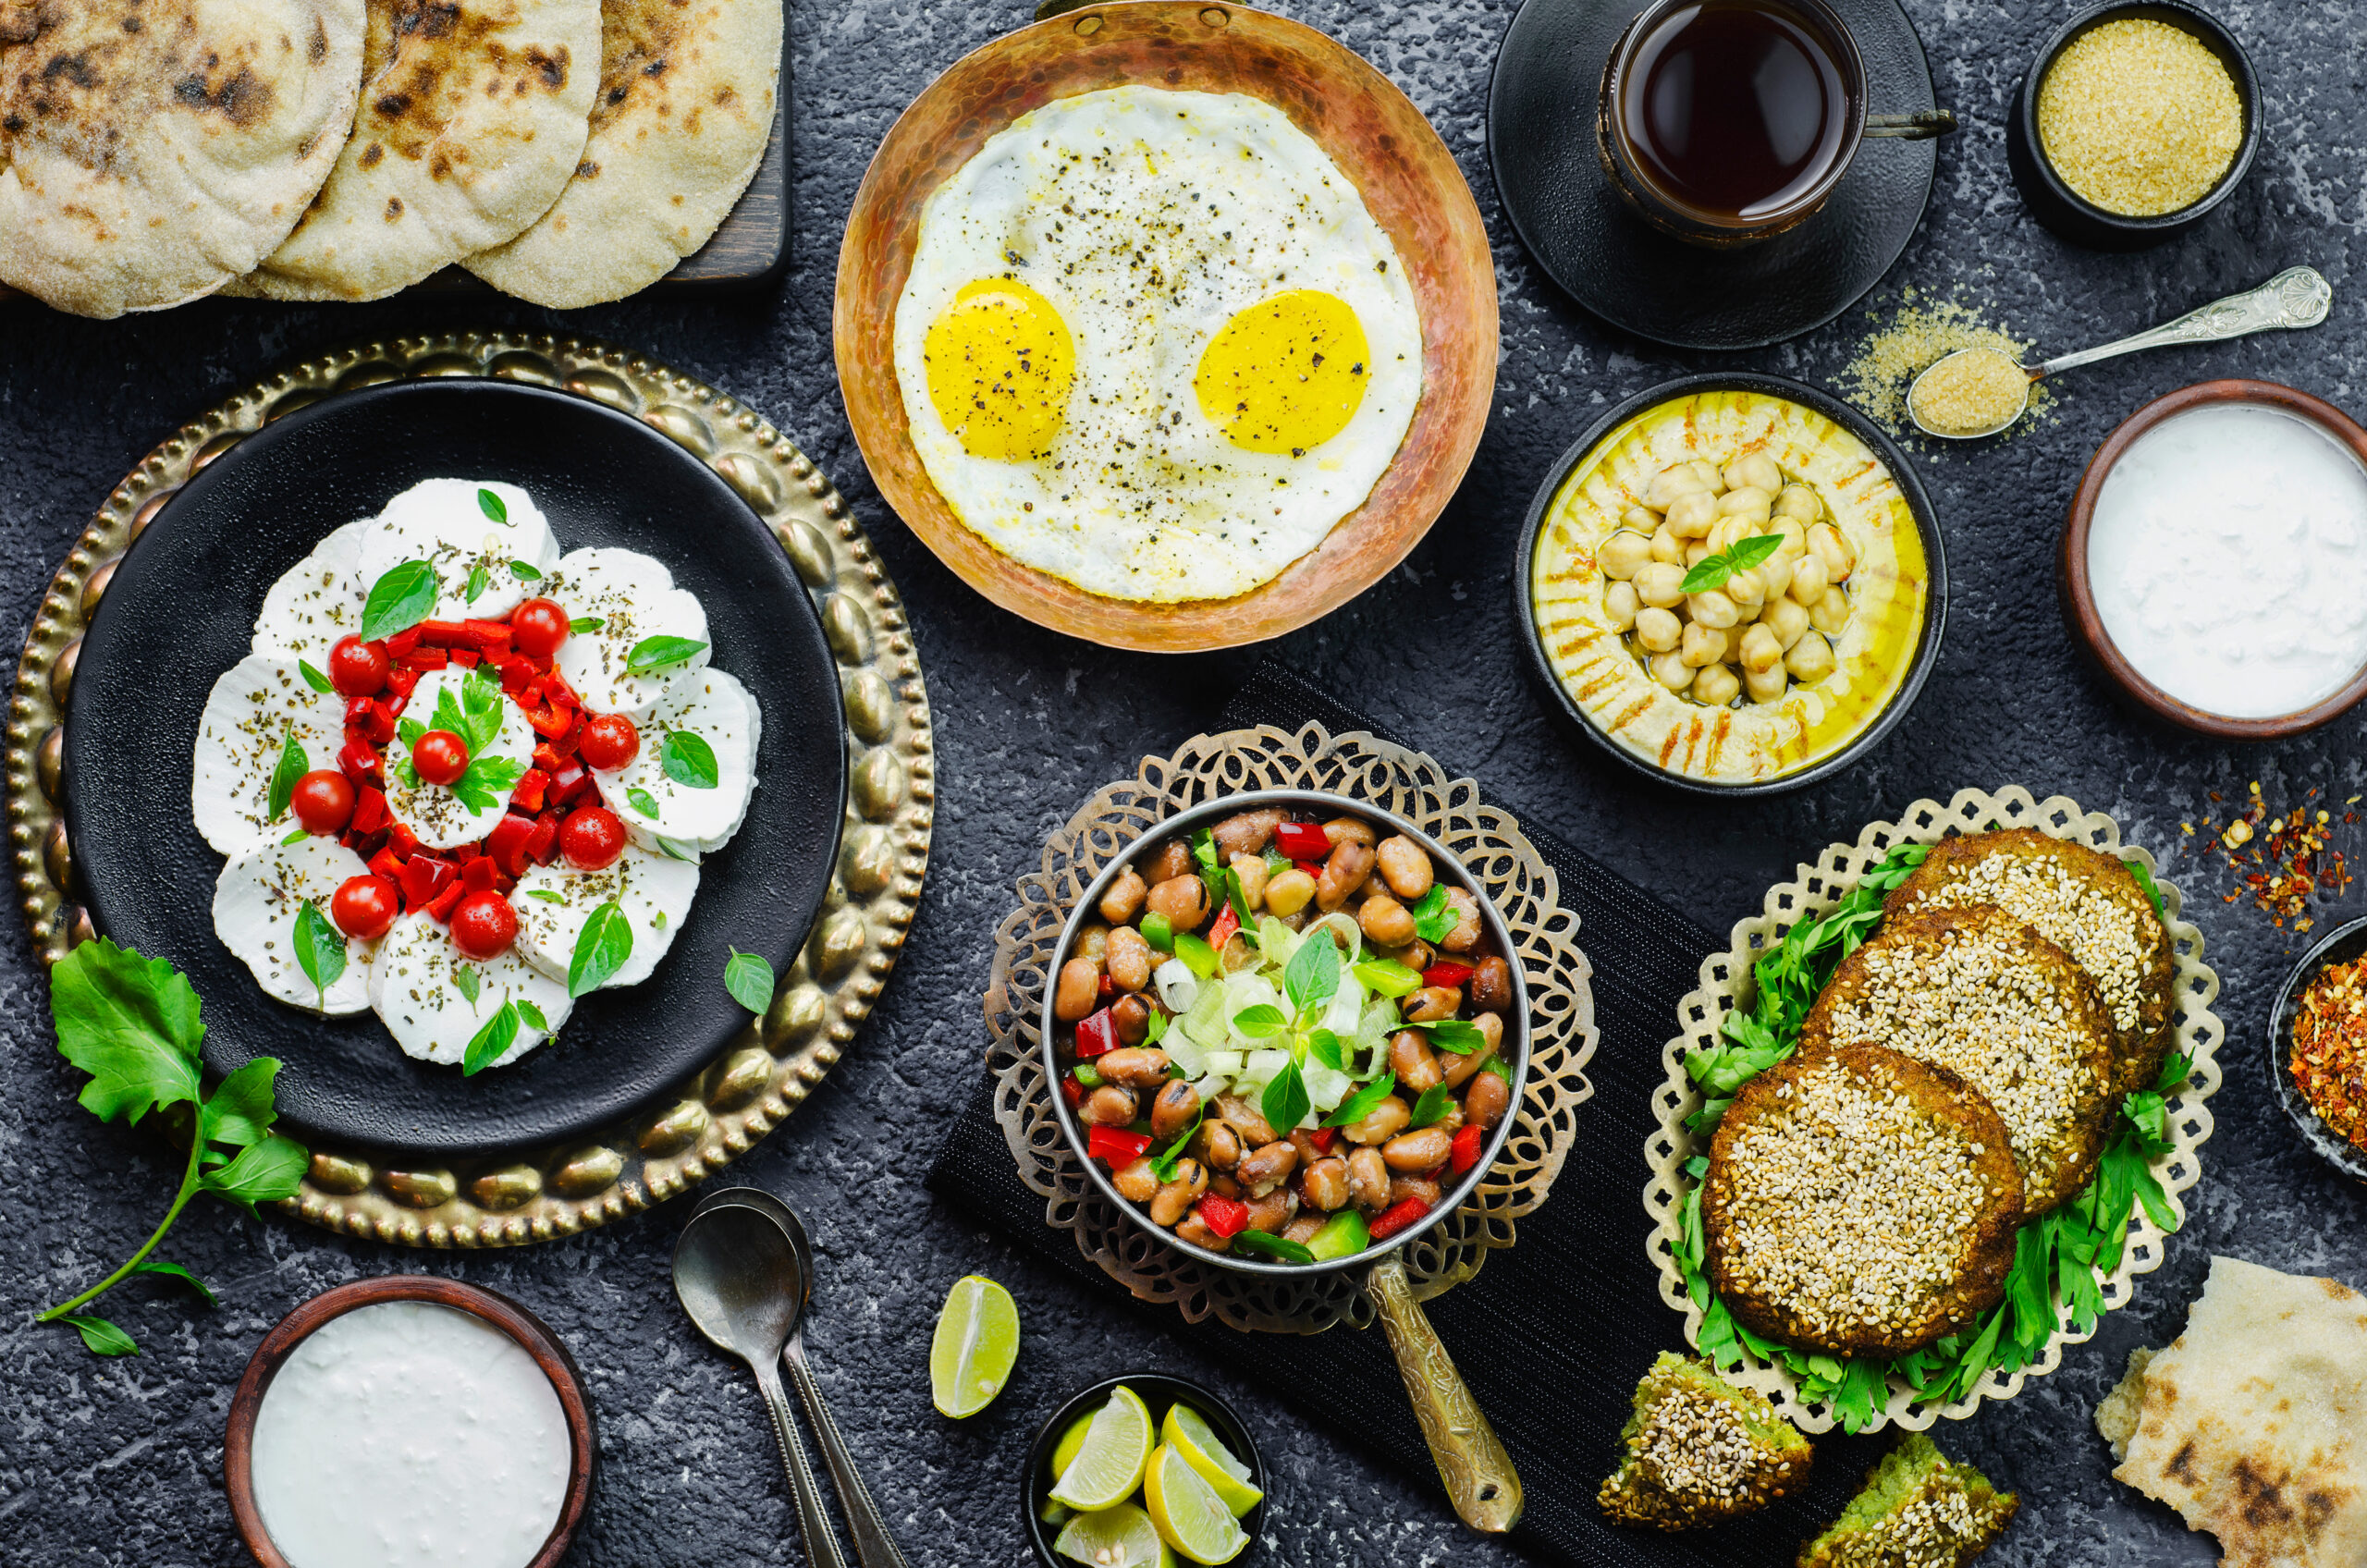 In the West, they say that Arabic breakfast is the most important meal of the day. Arabs say, “You bet your falafel it is!”